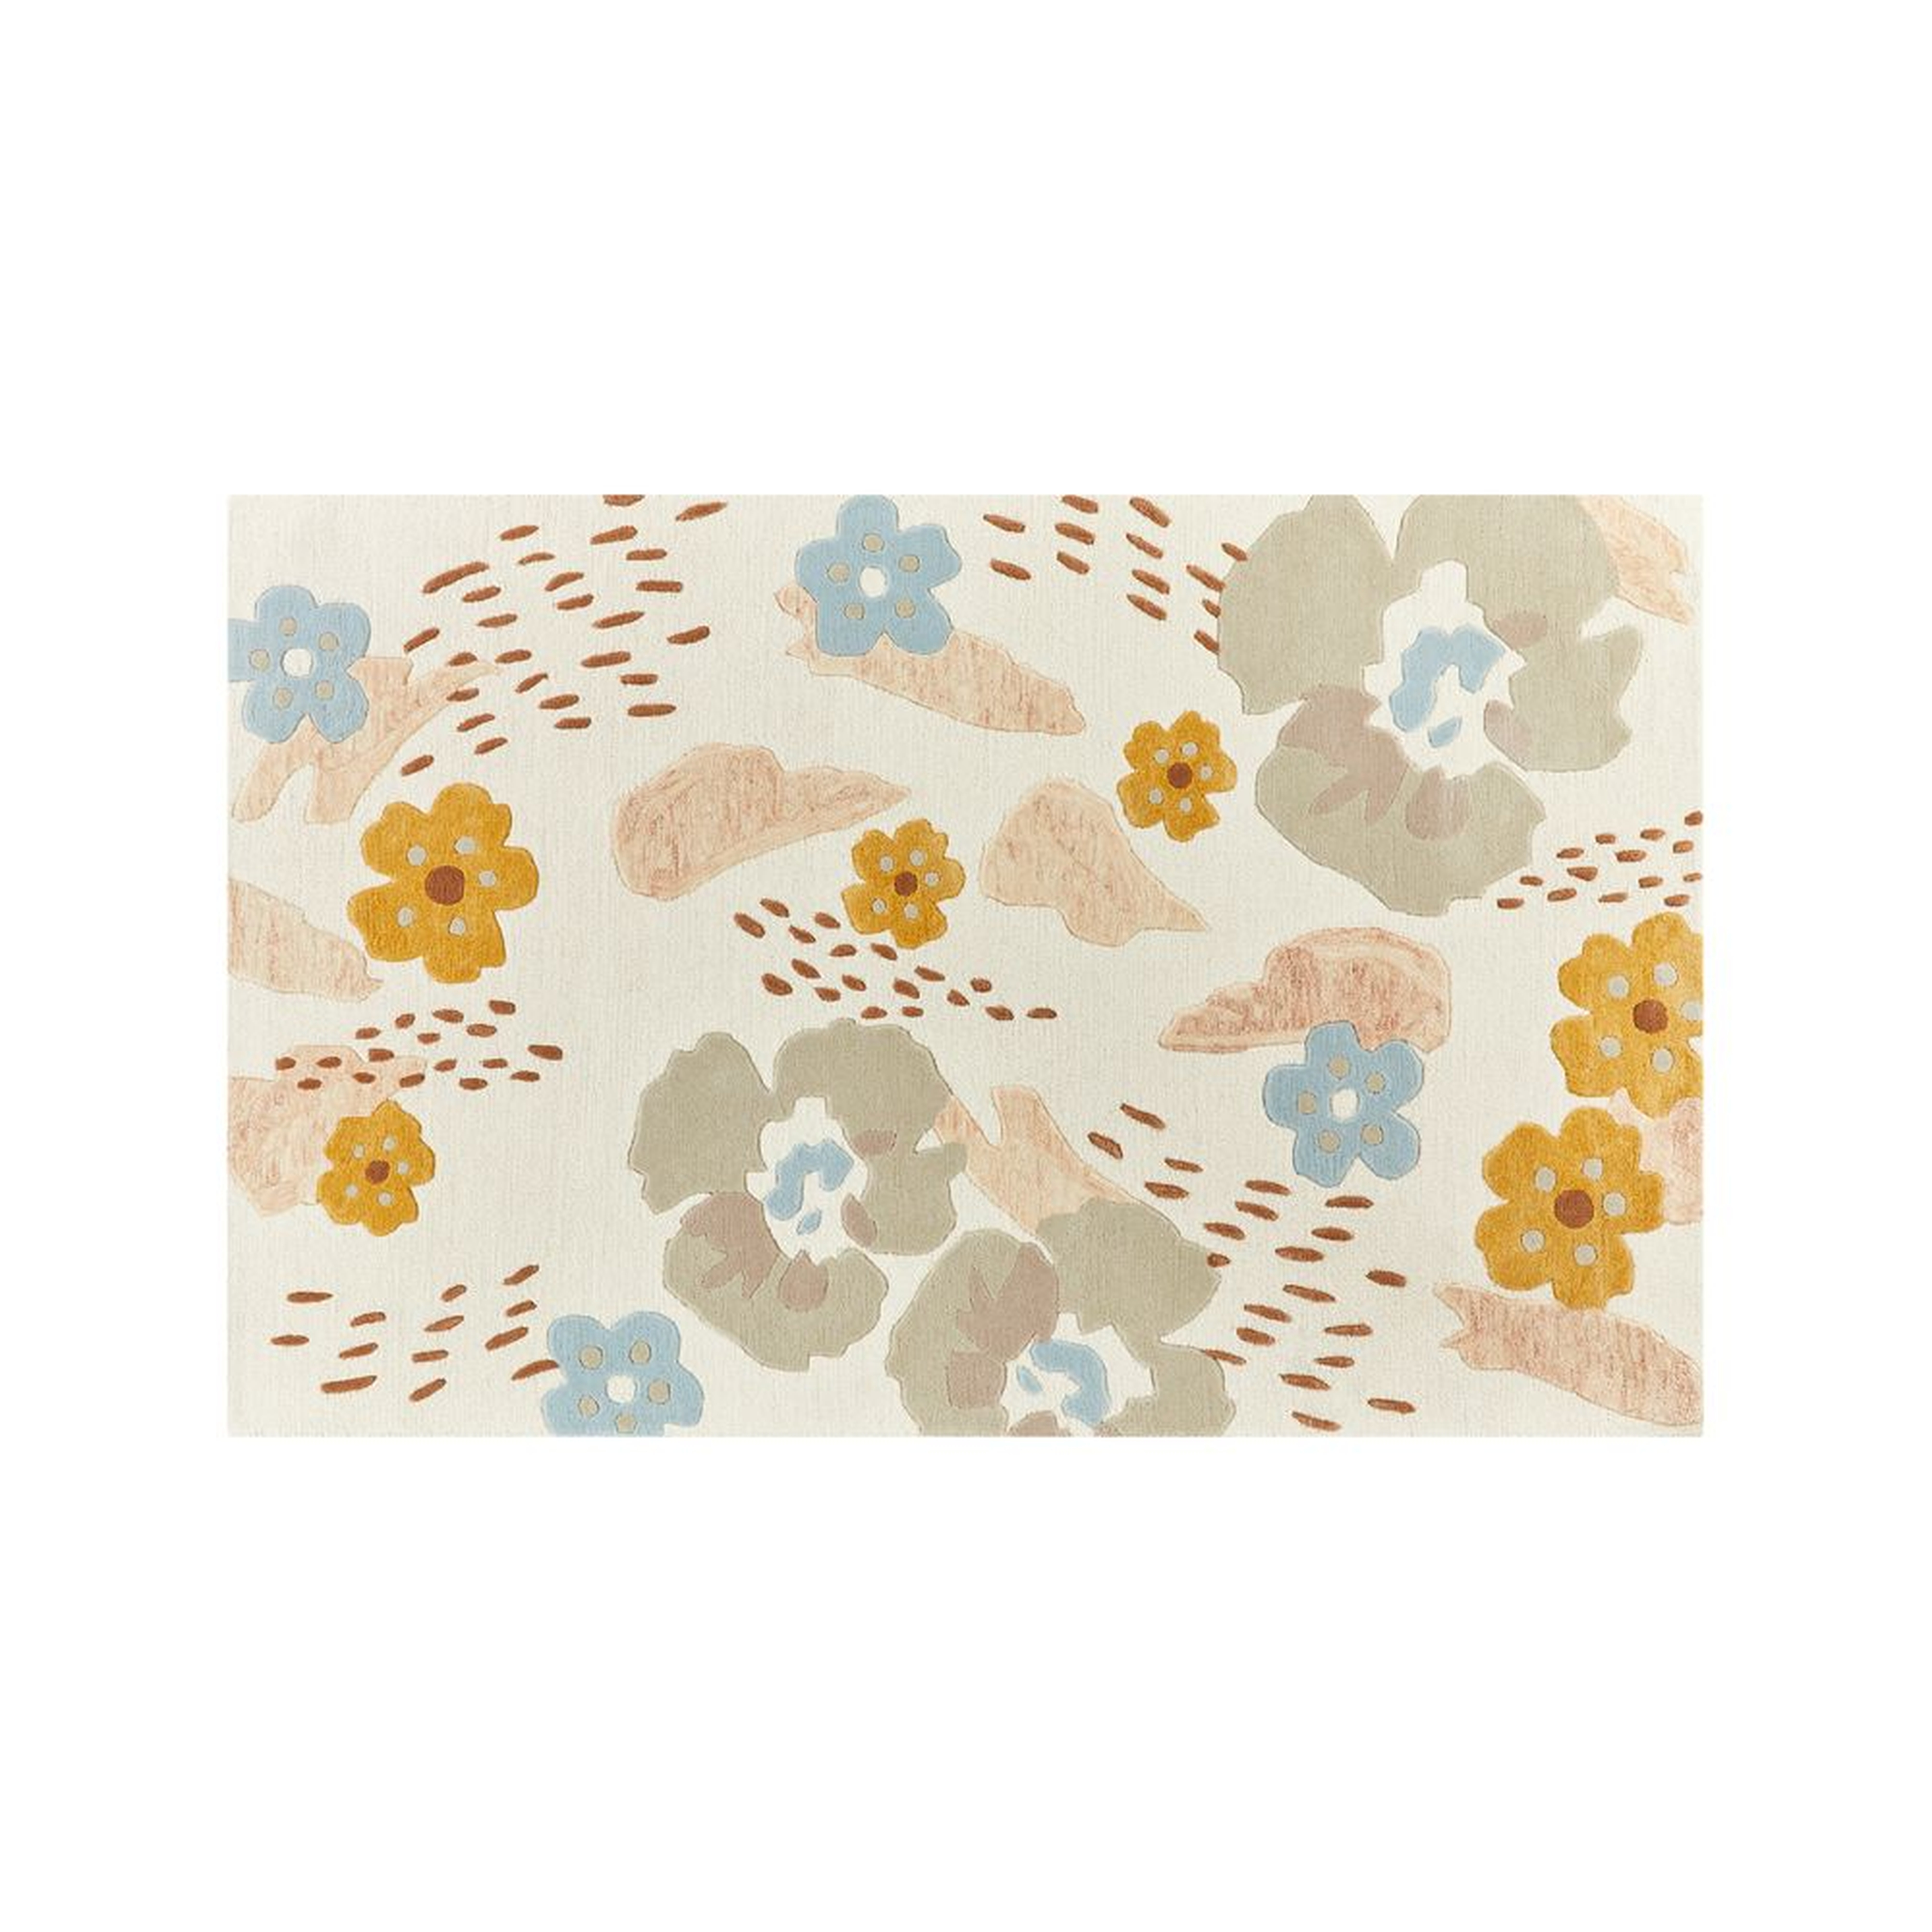 Modern Floral Rug 4'x6' - Crate and Barrel